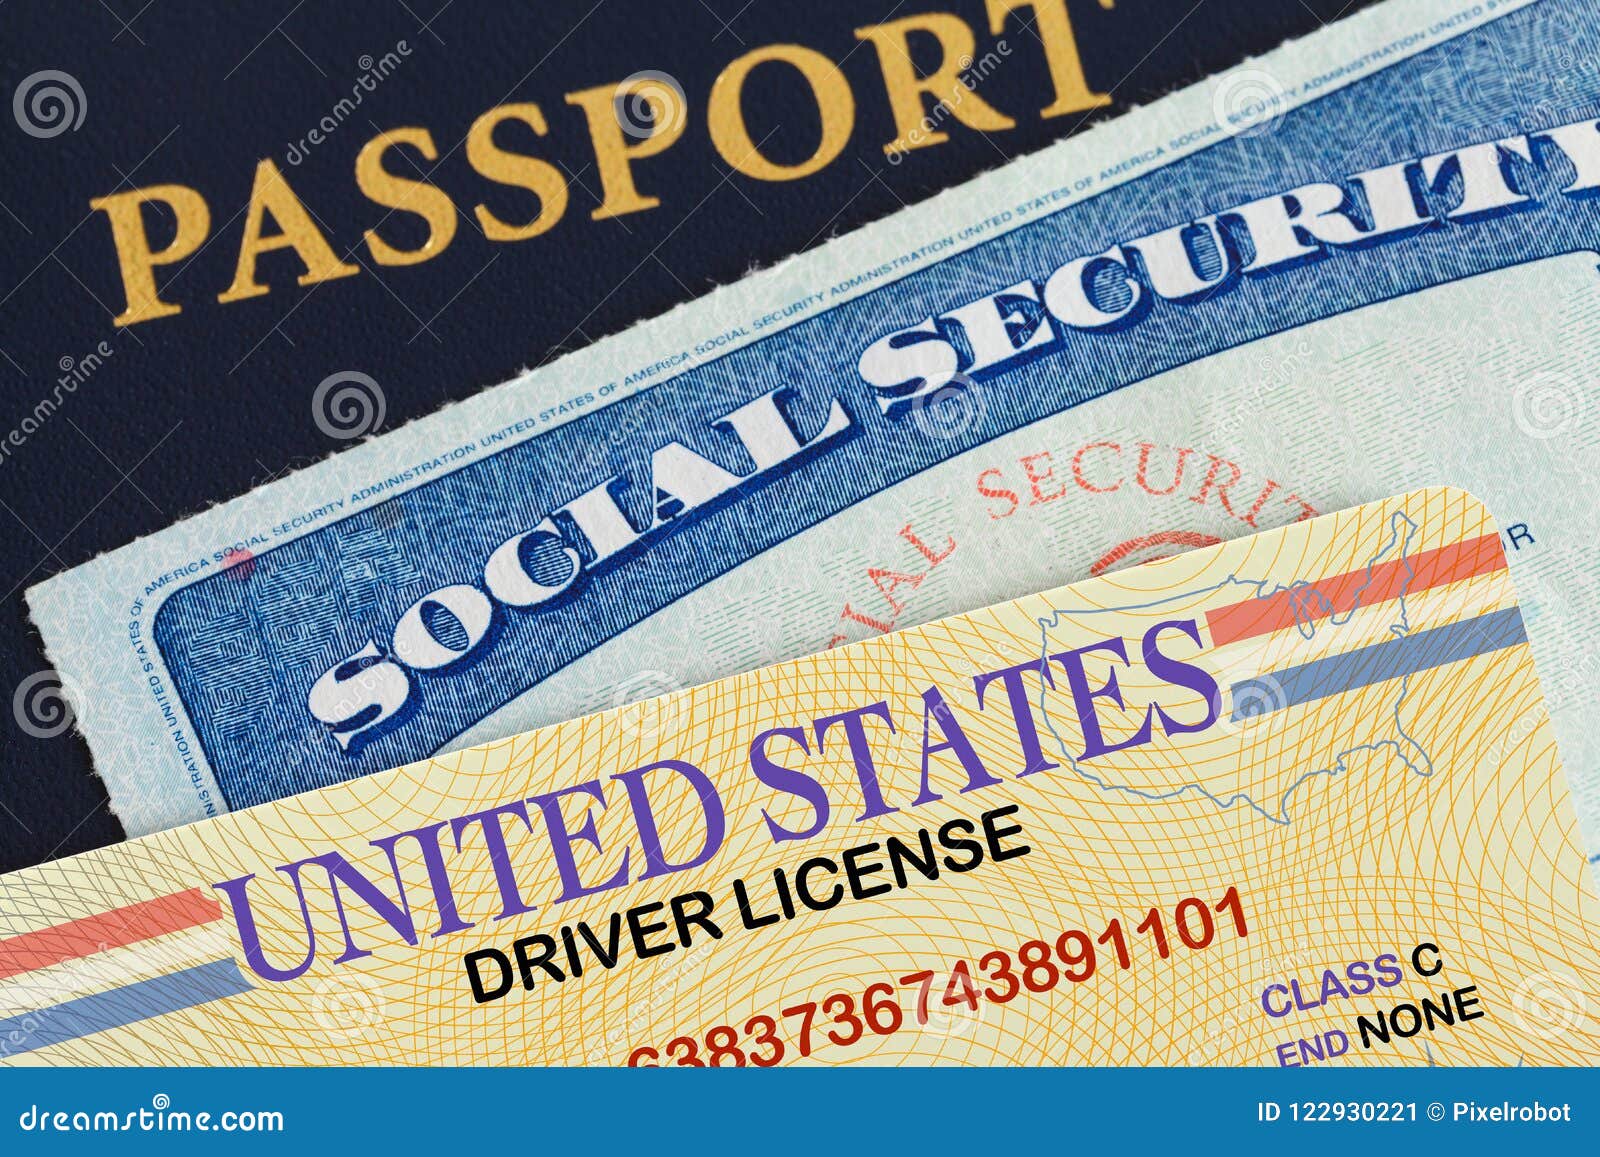 license social security and passport